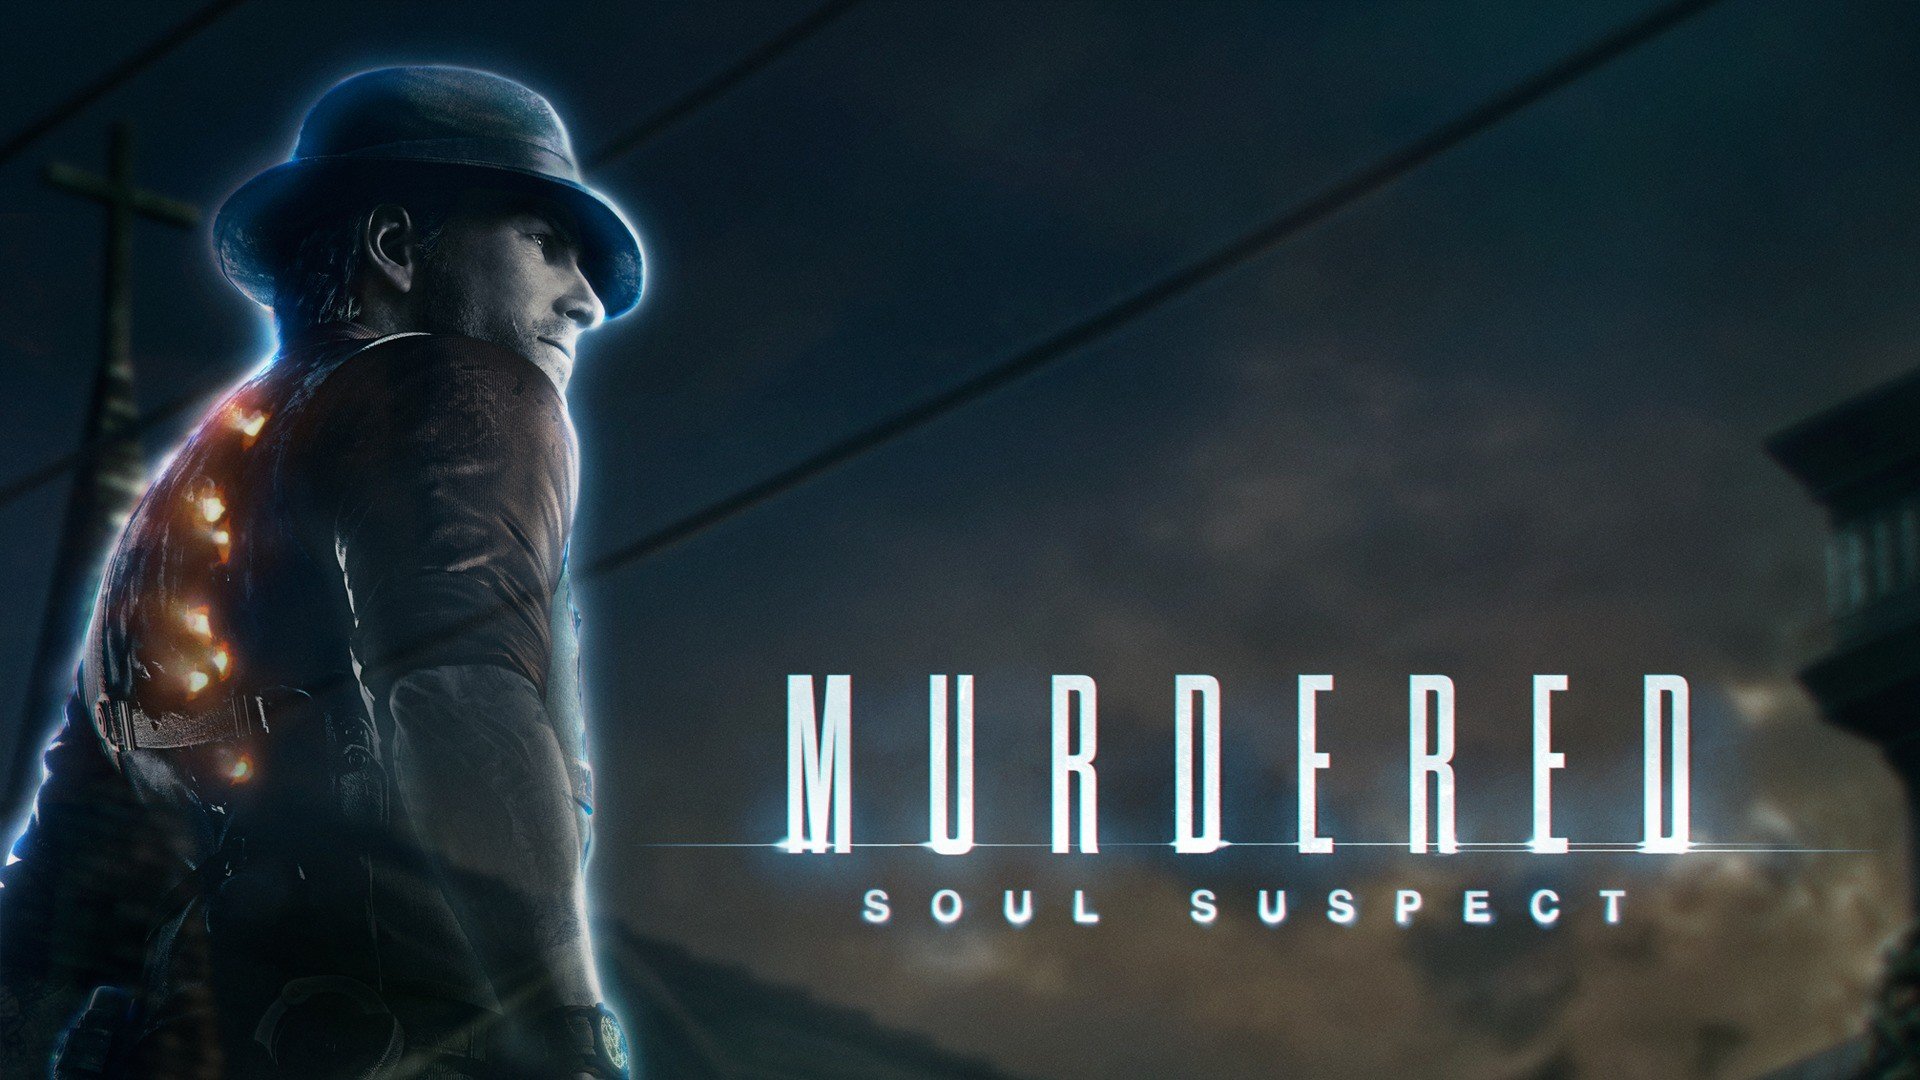 download murdered xbox 360 for free